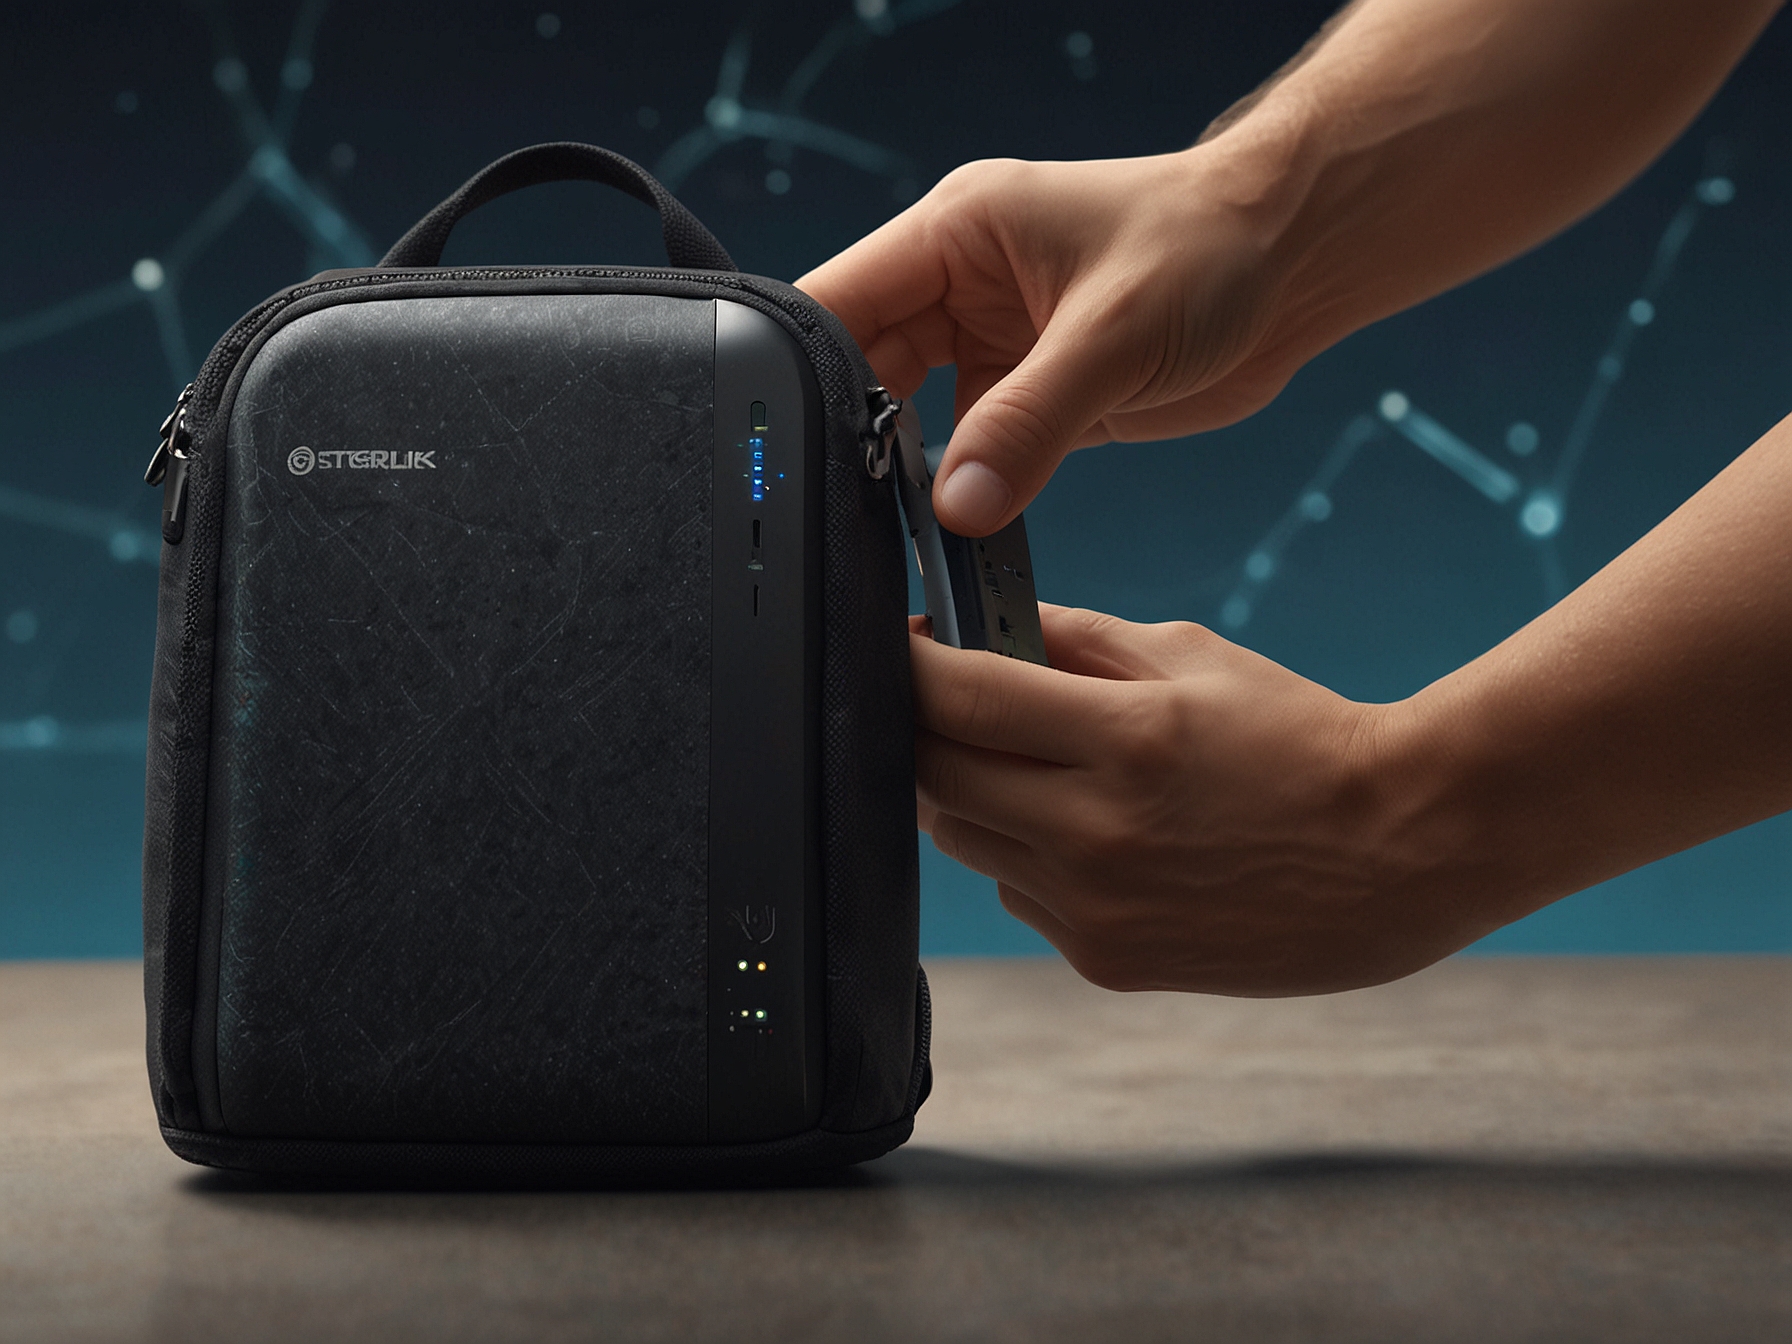 Image of a person placing the Starlink Mini router into a backpack, showcasing its compact size and portability for on-the-go internet connectivity.